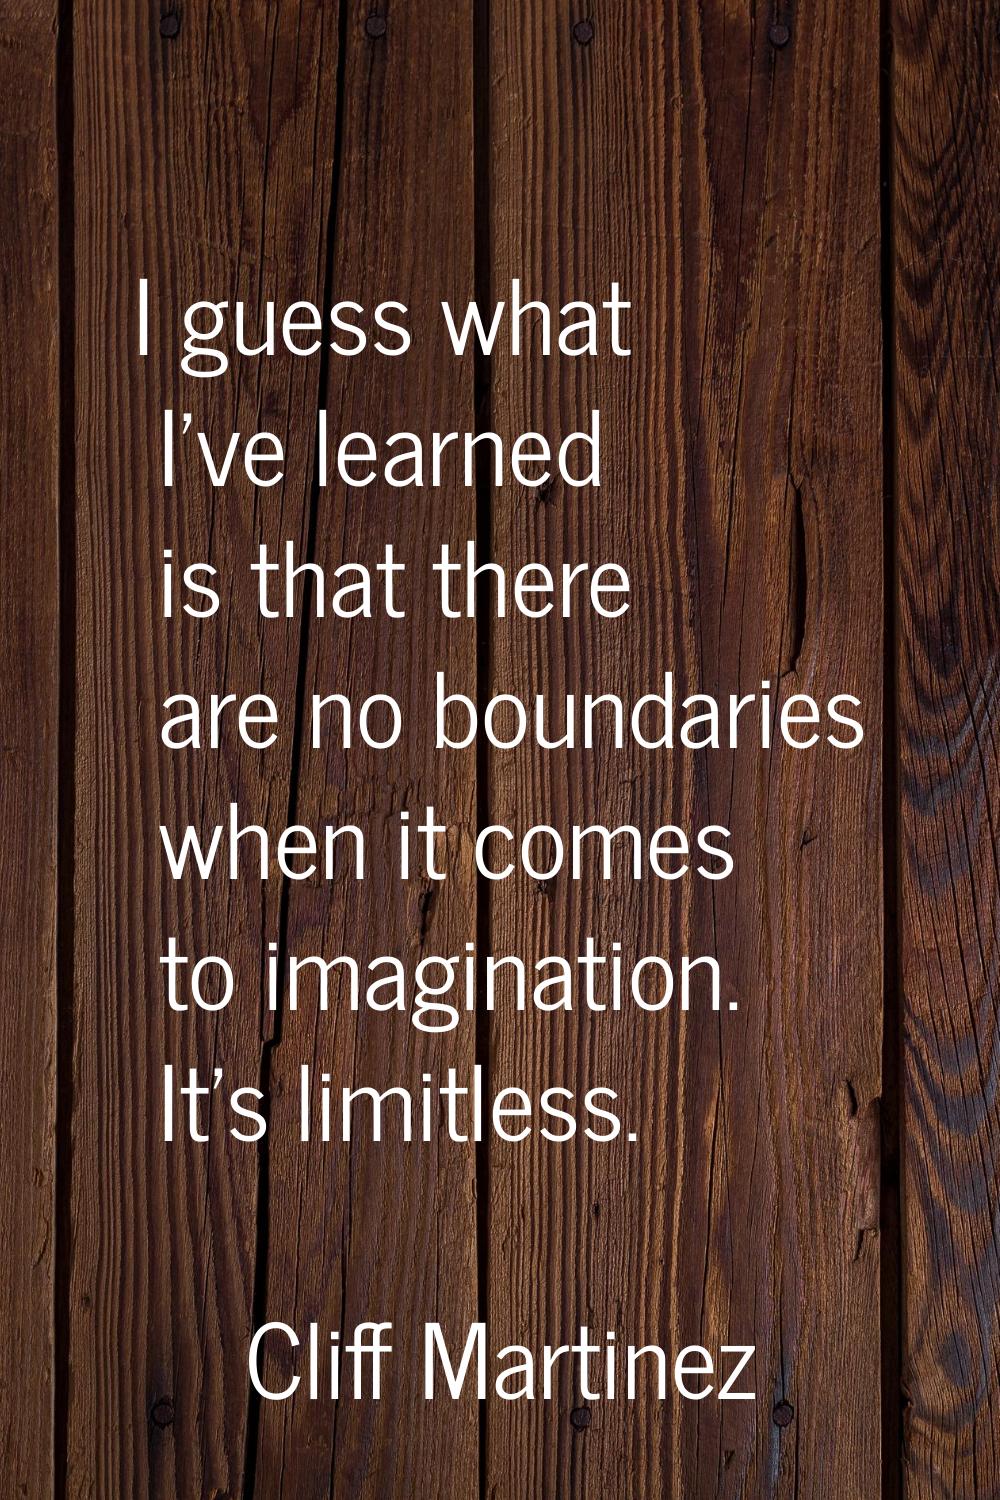 I guess what I've learned is that there are no boundaries when it comes to imagination. It's limitl